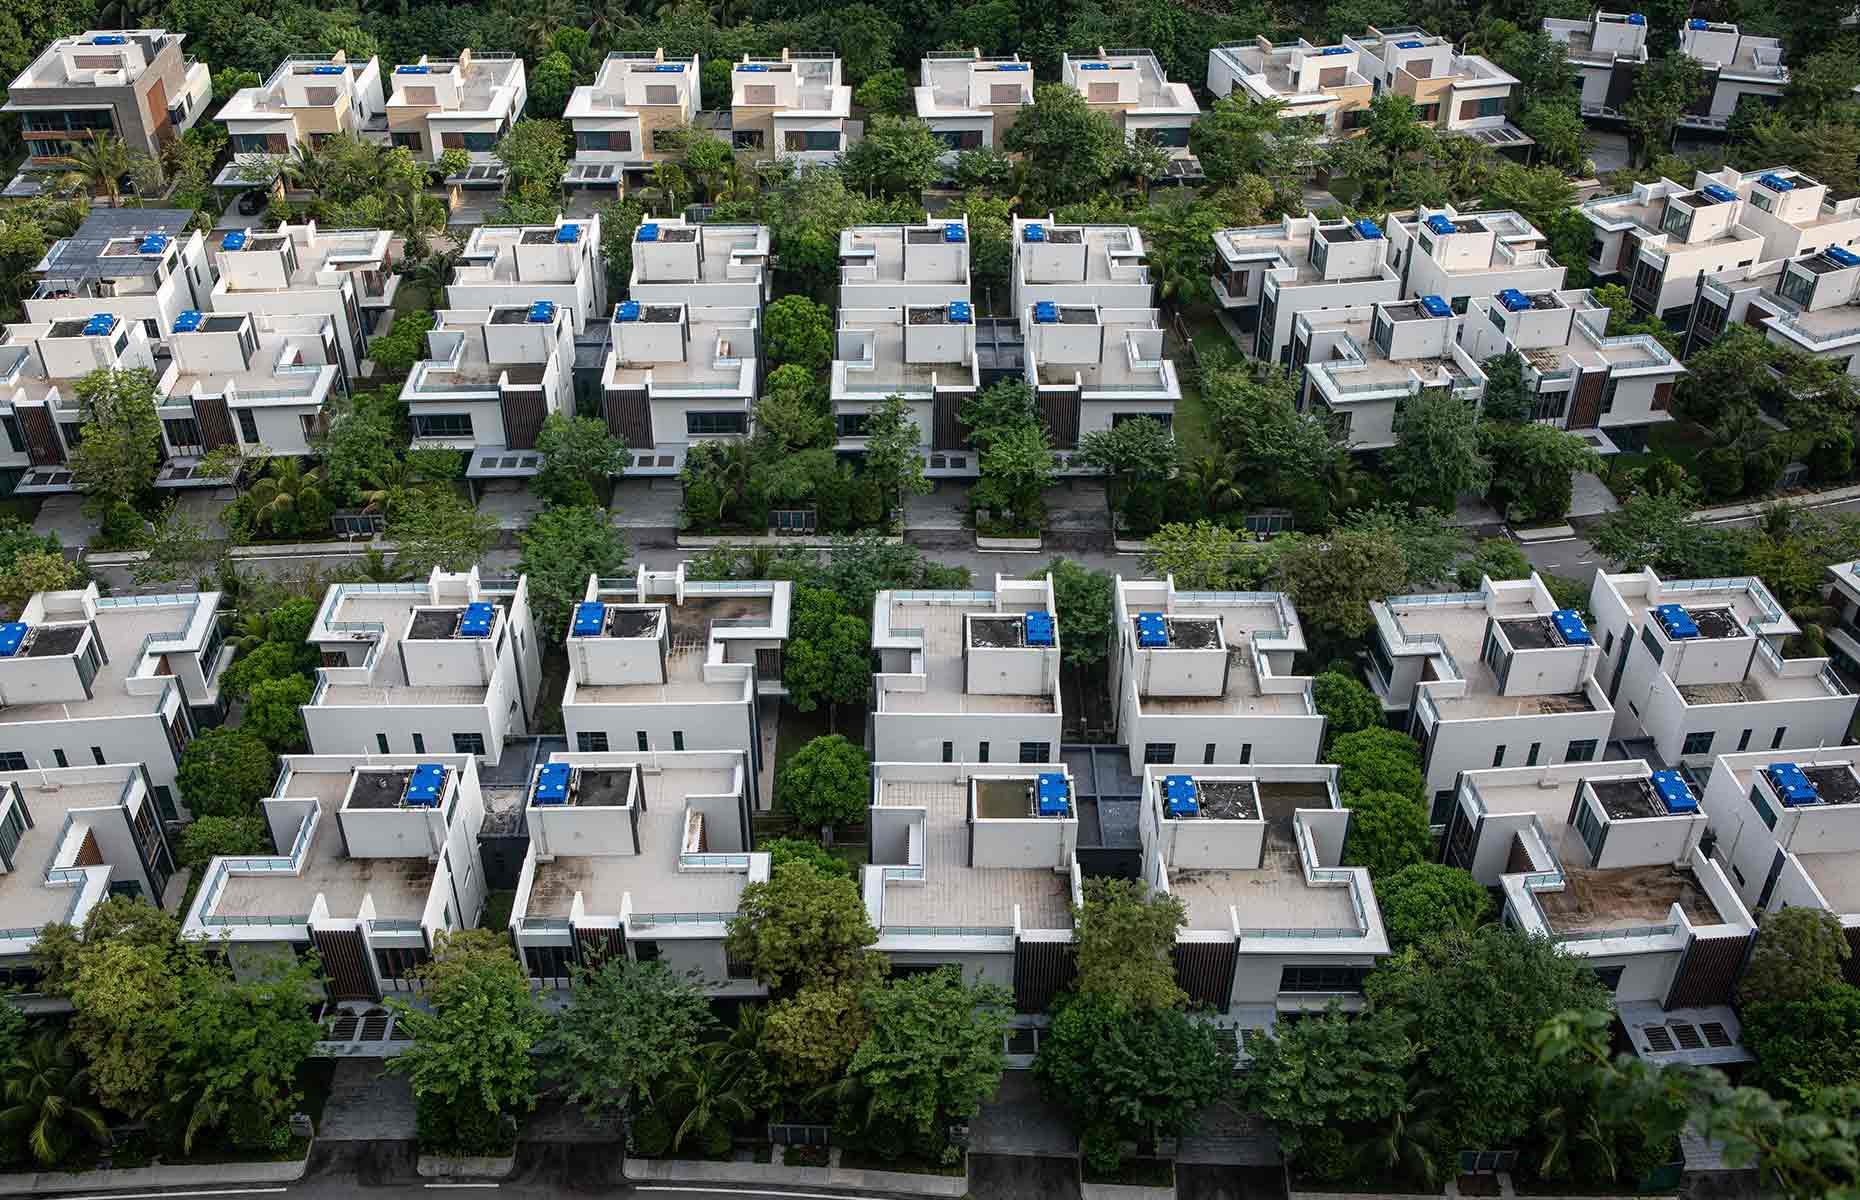 <p>Pictured here, rows of cookie-cutter villas sit in the shadow of Forest City's high-rise towers. Many seem to still be under construction, while signs of neglect are apparent from the roof terraces, some of which are flooded and mouldering. </p>  <p>Unfortunately, China's property crisis in 2021 couldn't have come at a worse time for the fledgling city. Country Garden, once a behemoth of China's housing sector, now reportedly faces debts of $200 billion. While the beleaguered developers told the <em>BBC</em> that they were "optimistic" that Forest City would be completed, that likelihood appears to be dwindling. Country Garden is now in the midst of a liquidation hearing to decide the future of the company.</p>